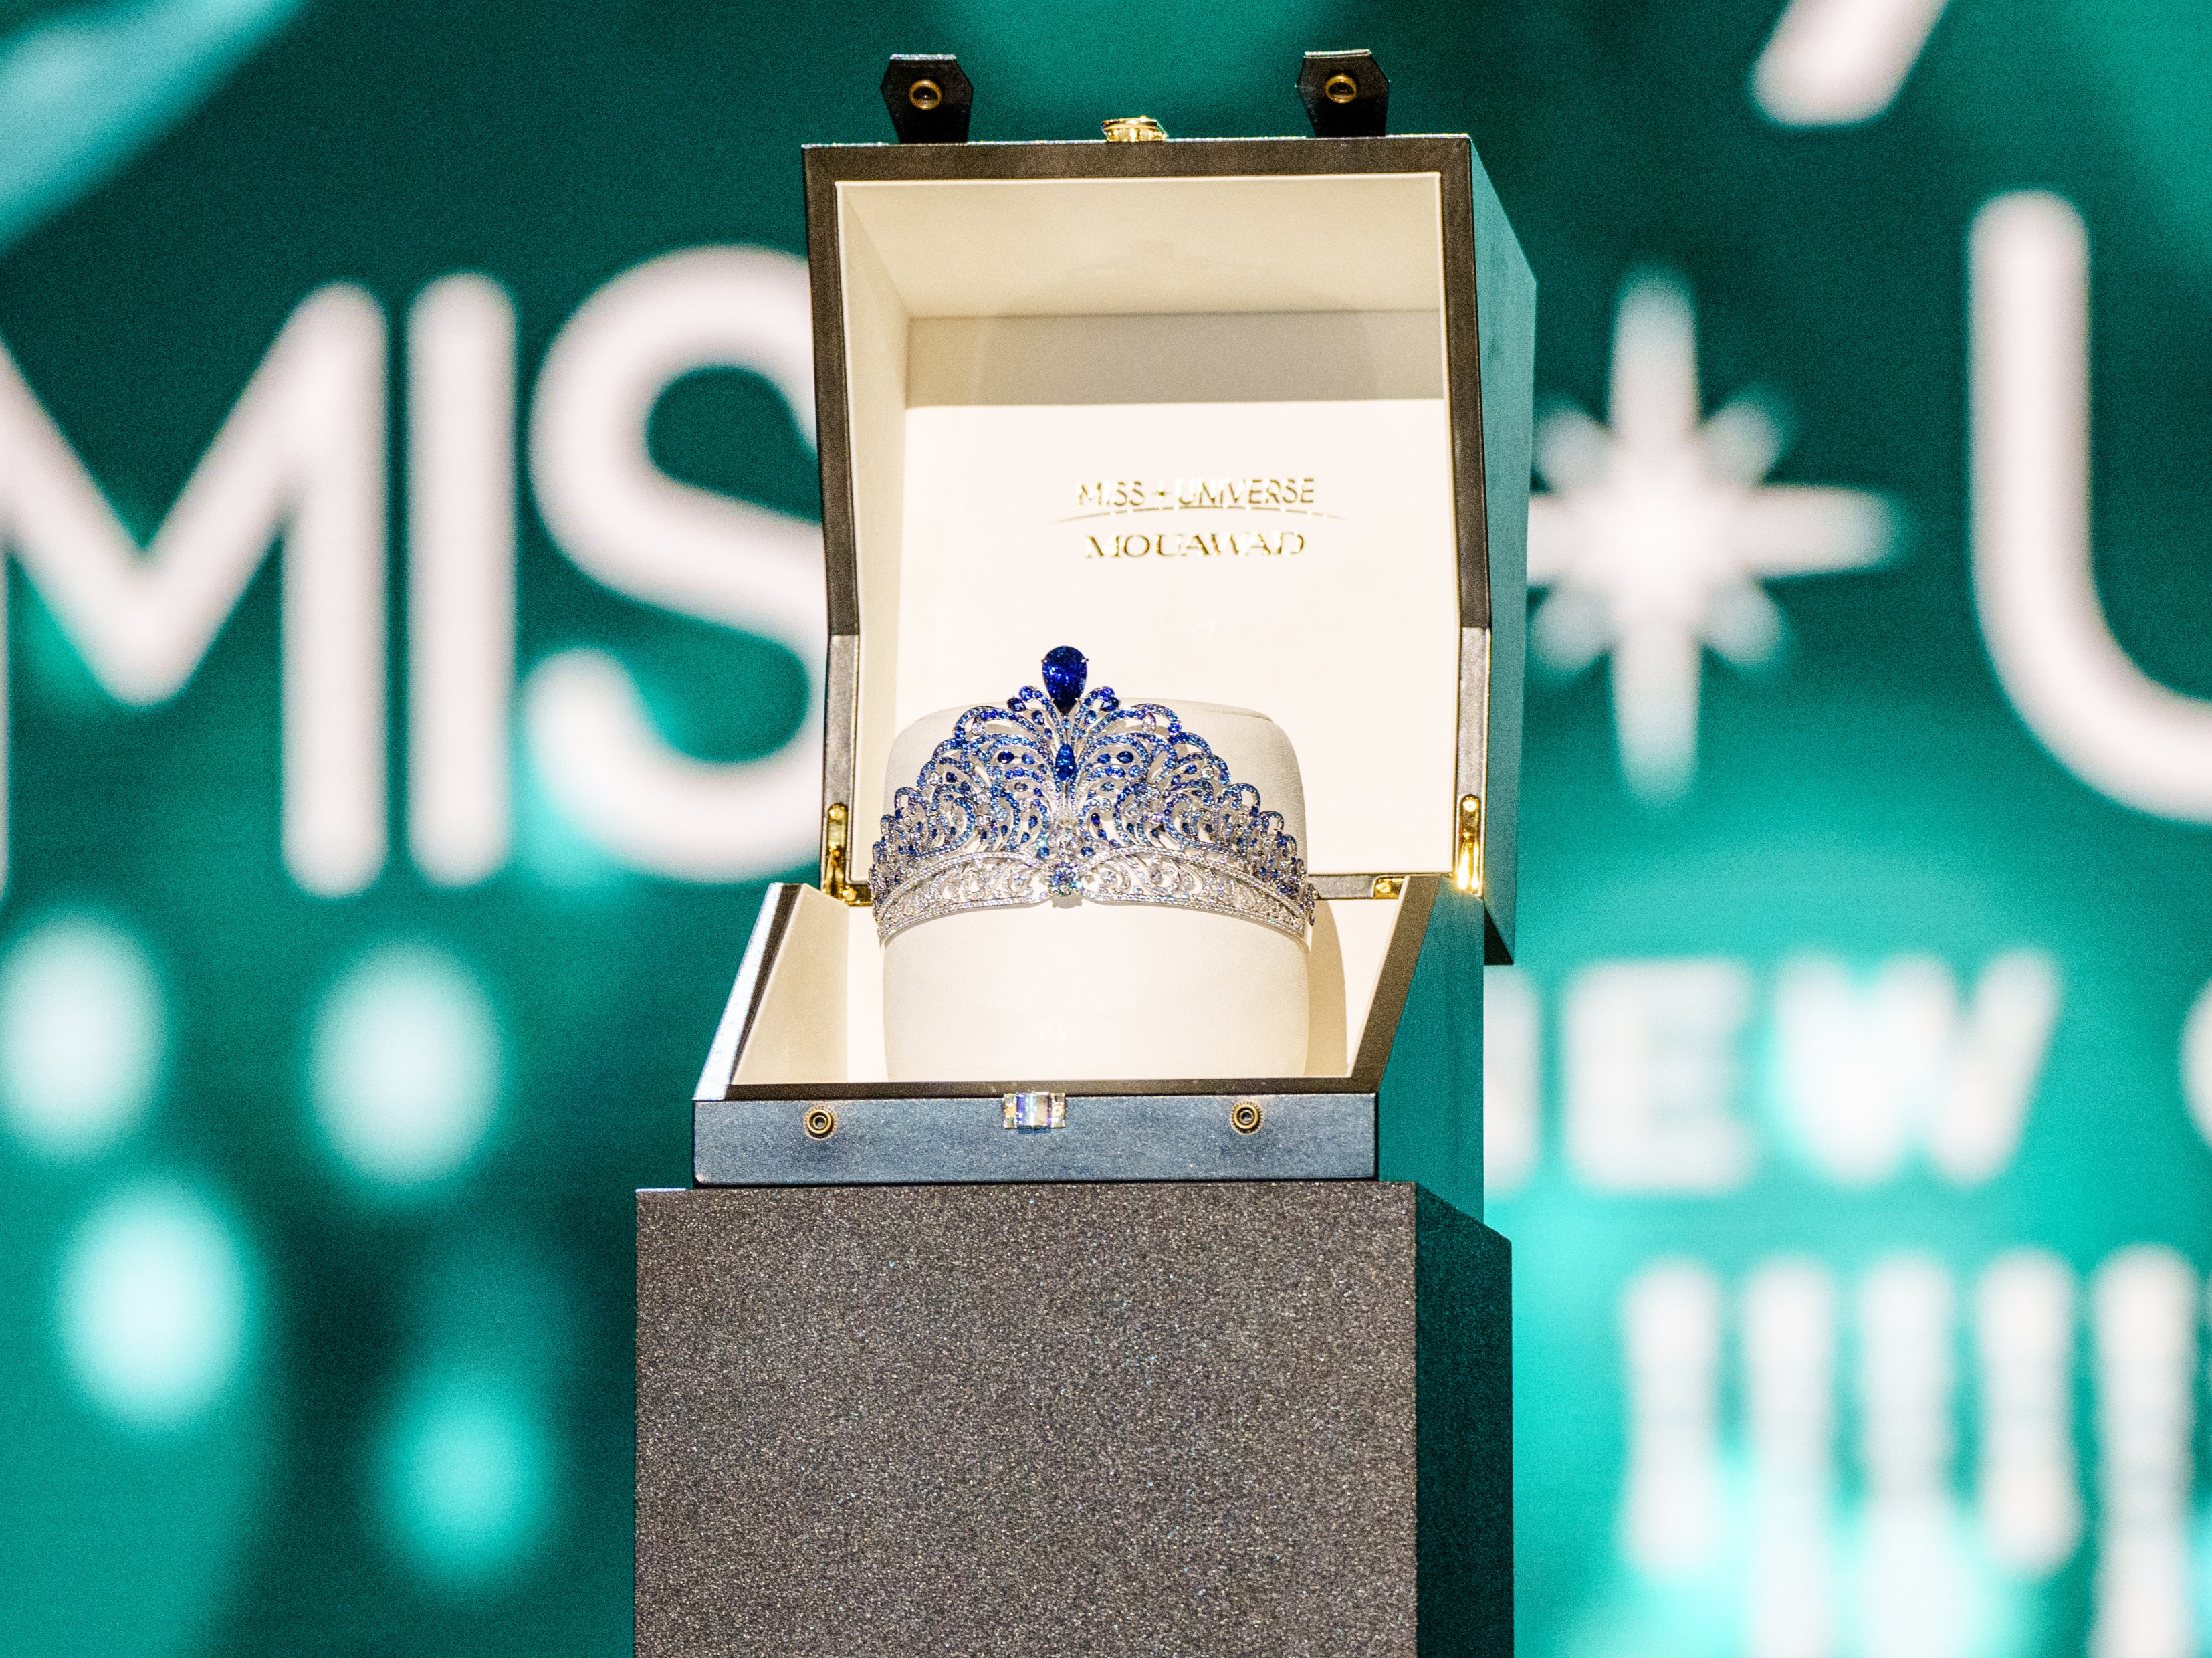 A general view of the Miss Universe titleholder crown ‘Force for Good’ during the crown unveiling press conference at the New Orleans Morial Convention Center seen in this photo from January 2023